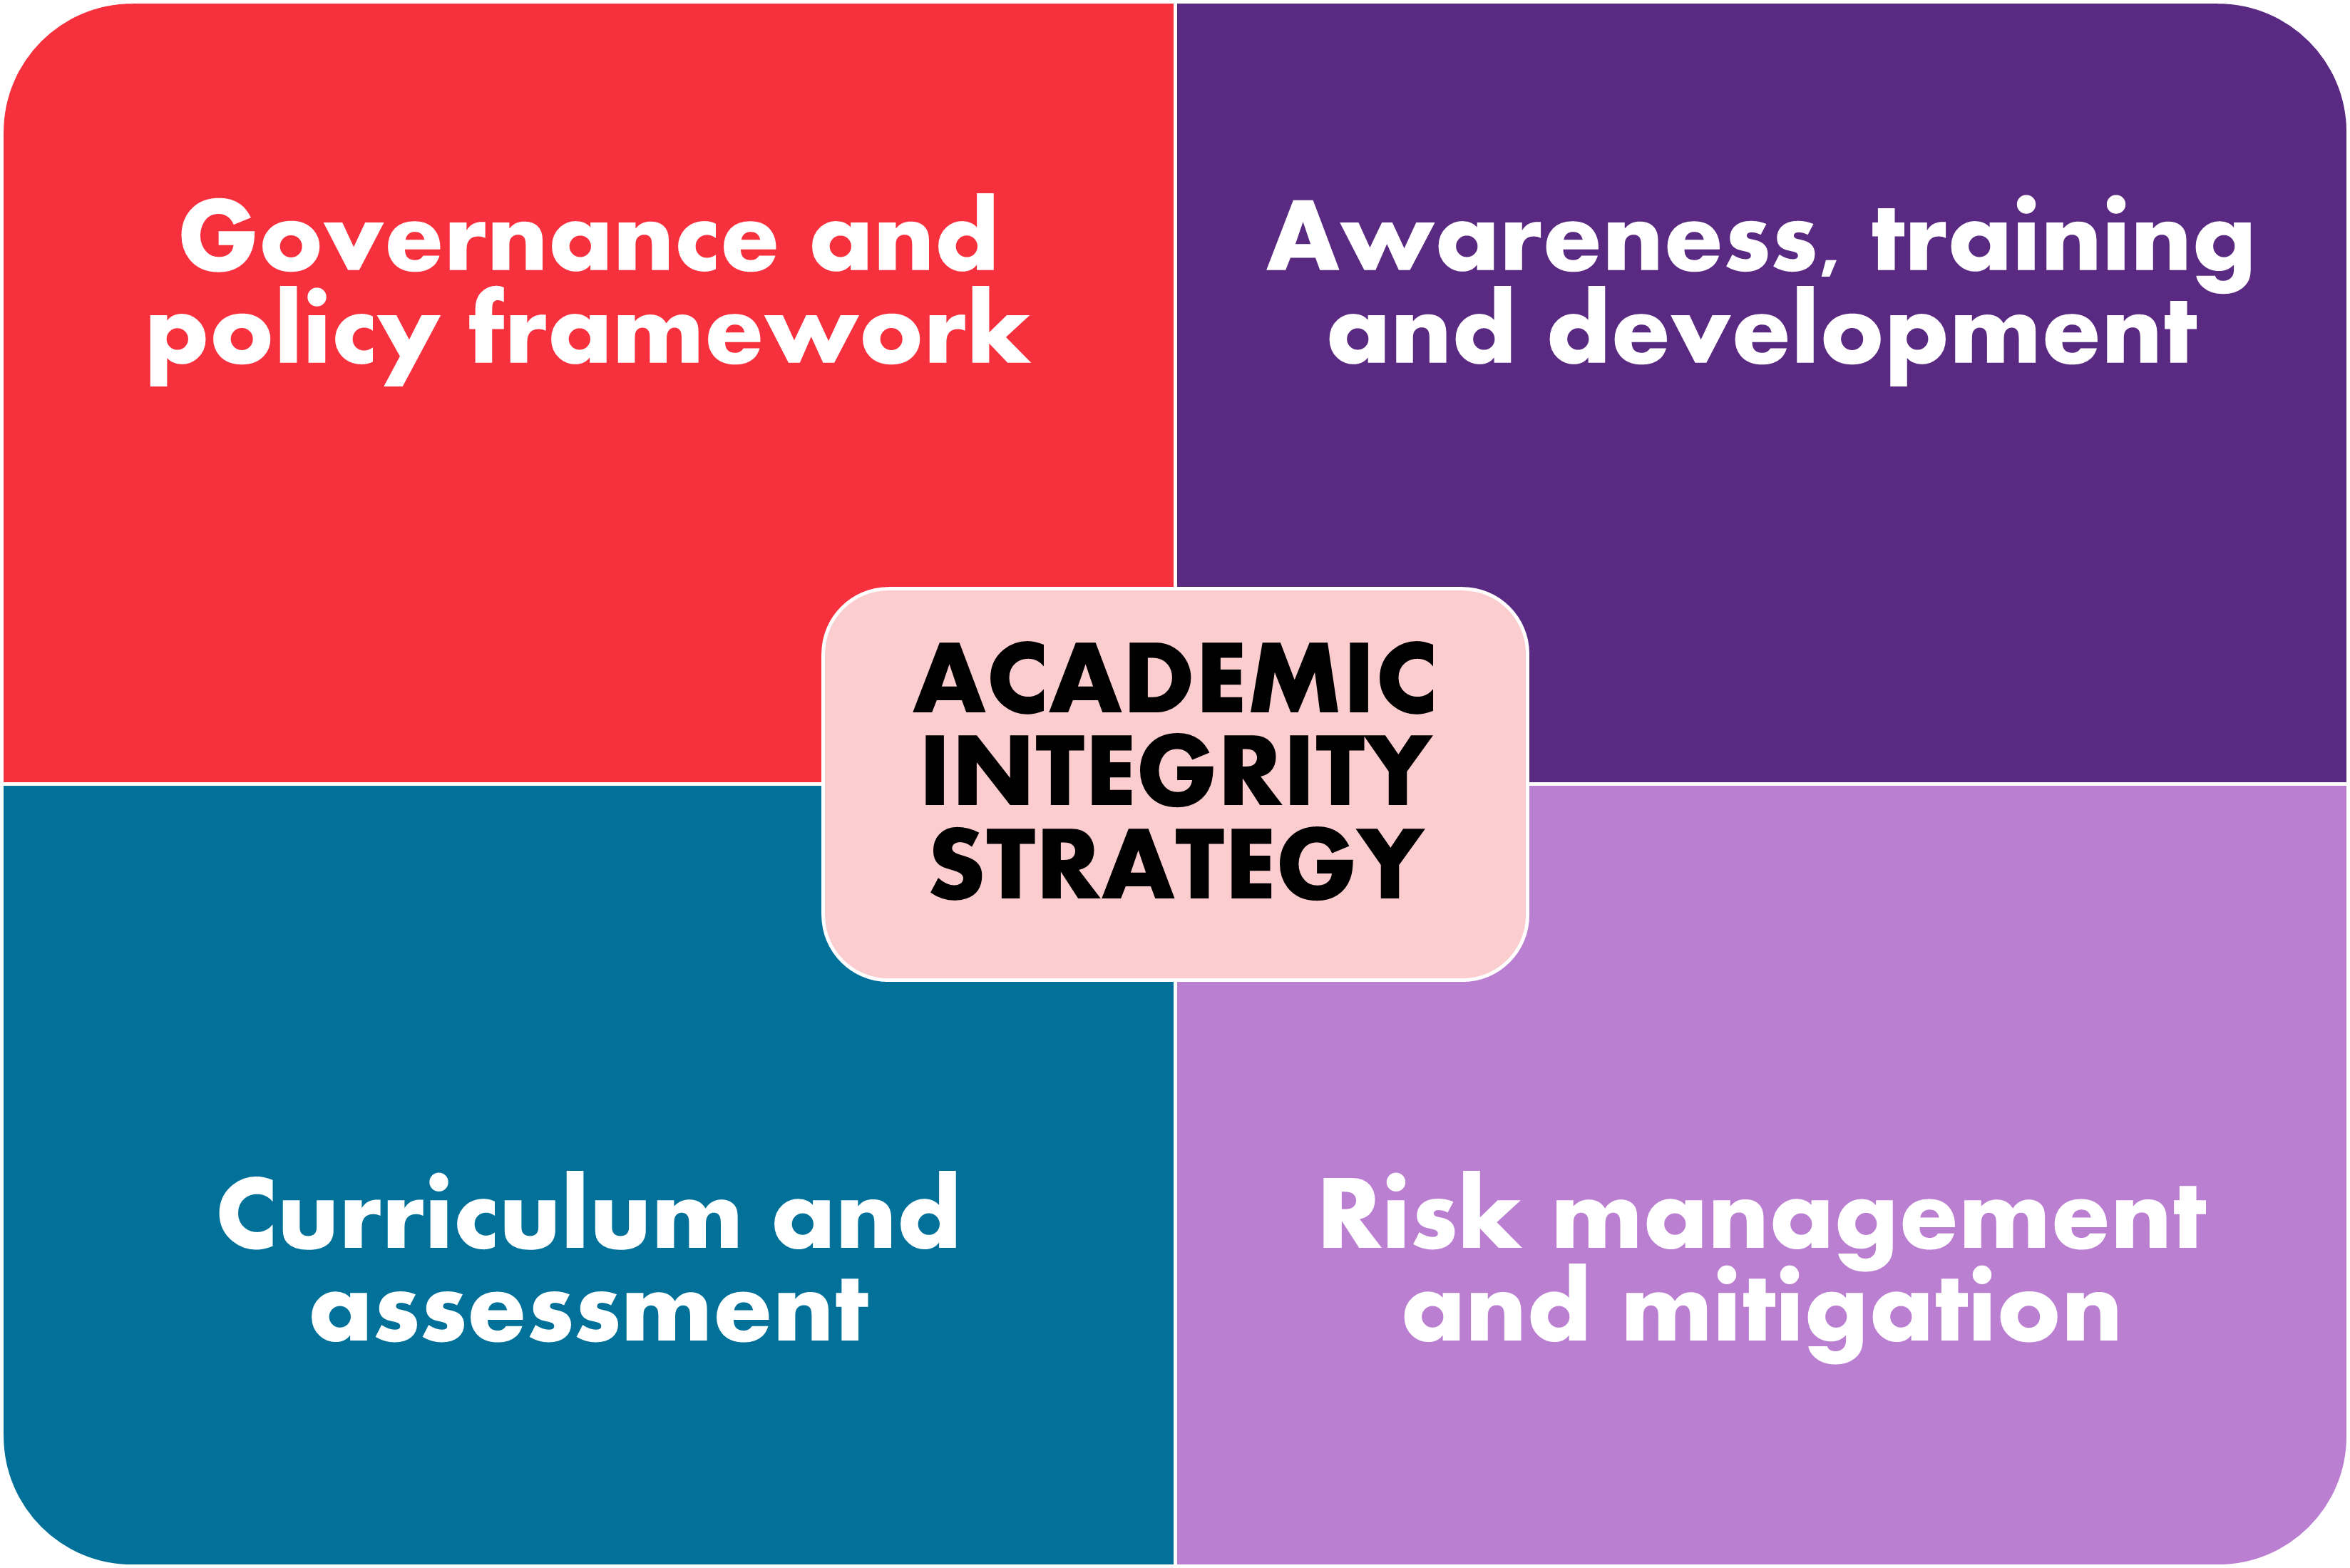 Academic integrity strategy - governance, awareness, curriculum/assessment, and risk management